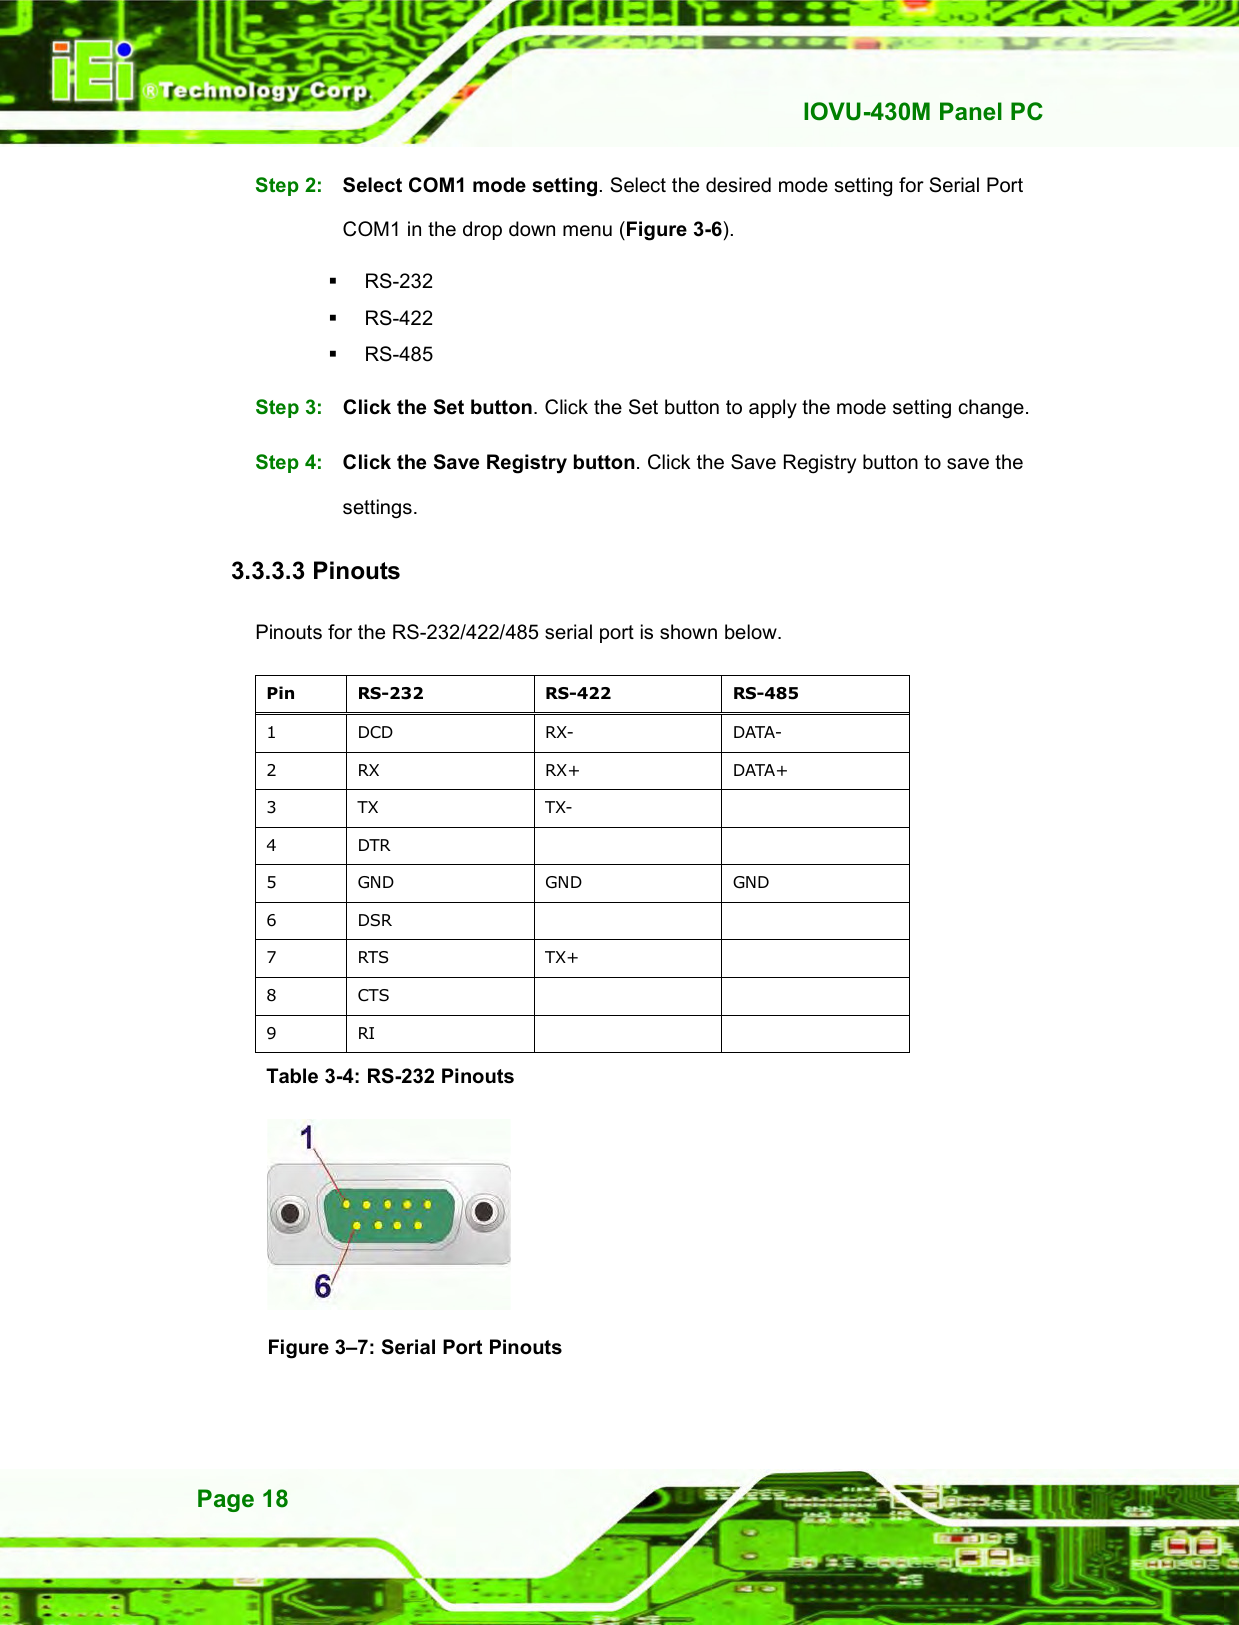   IOVU-430M Panel PC Page 18 Step 2:  Select COM1 mode setting. Select the desired mode setting for Serial Port COM1 in the drop down menu (Figure 3-6).   RS-232   RS-422   RS-485 Step 3:  Click the Set button. Click the Set button to apply the mode setting change. Step 4:  Click the Save Registry button. Click the Save Registry button to save the settings. Step 0: 3.3.3.3 Pinouts Pinouts for the RS-232/422/485 serial port is shown below. Pin  RS-232  RS-422  RS-485 1  DCD  RX-  DATA- 2  RX  RX+  DATA+ 3  TX  TX-   4  DTR     5  GND  GND  GND 6  DSR     7  RTS  TX+   8  CTS     9  RI     Table 3-4: RS-232 Pinouts   Figure 3–7: Serial Port Pinouts 